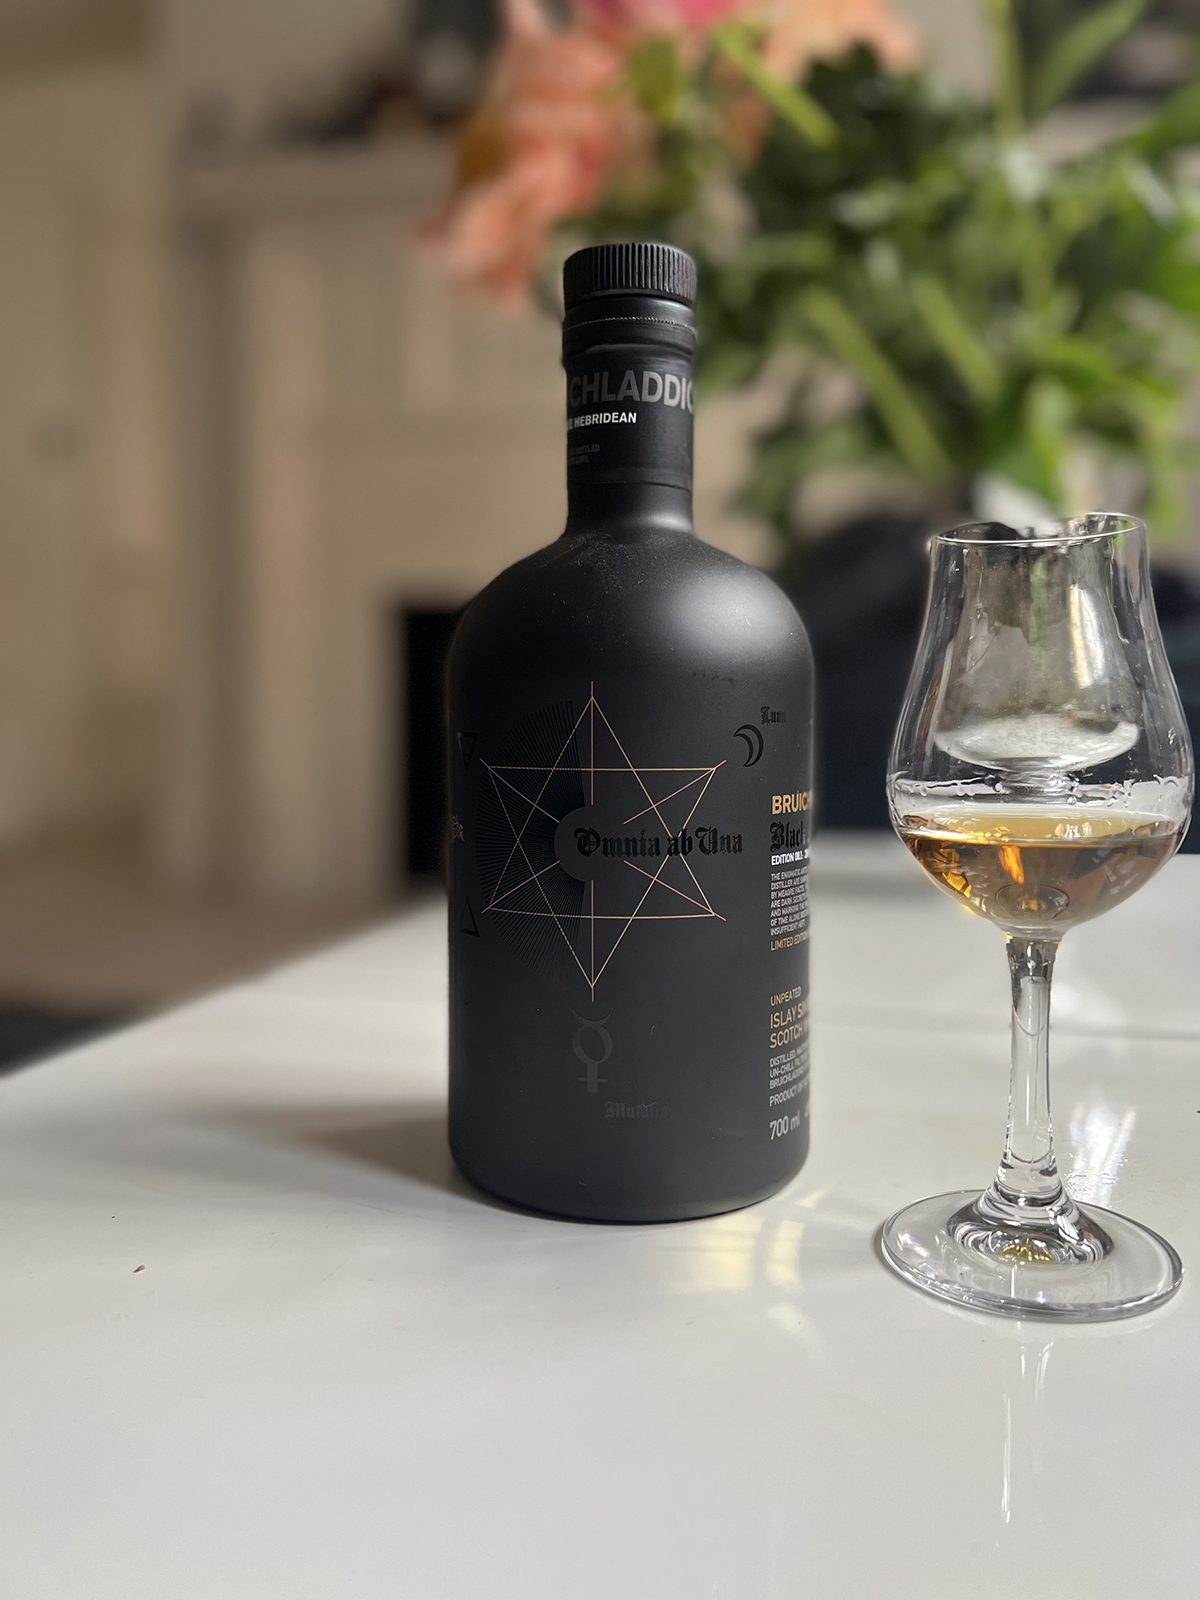 Black whiskey bottle with a star on it and a glass of whiskey on a table